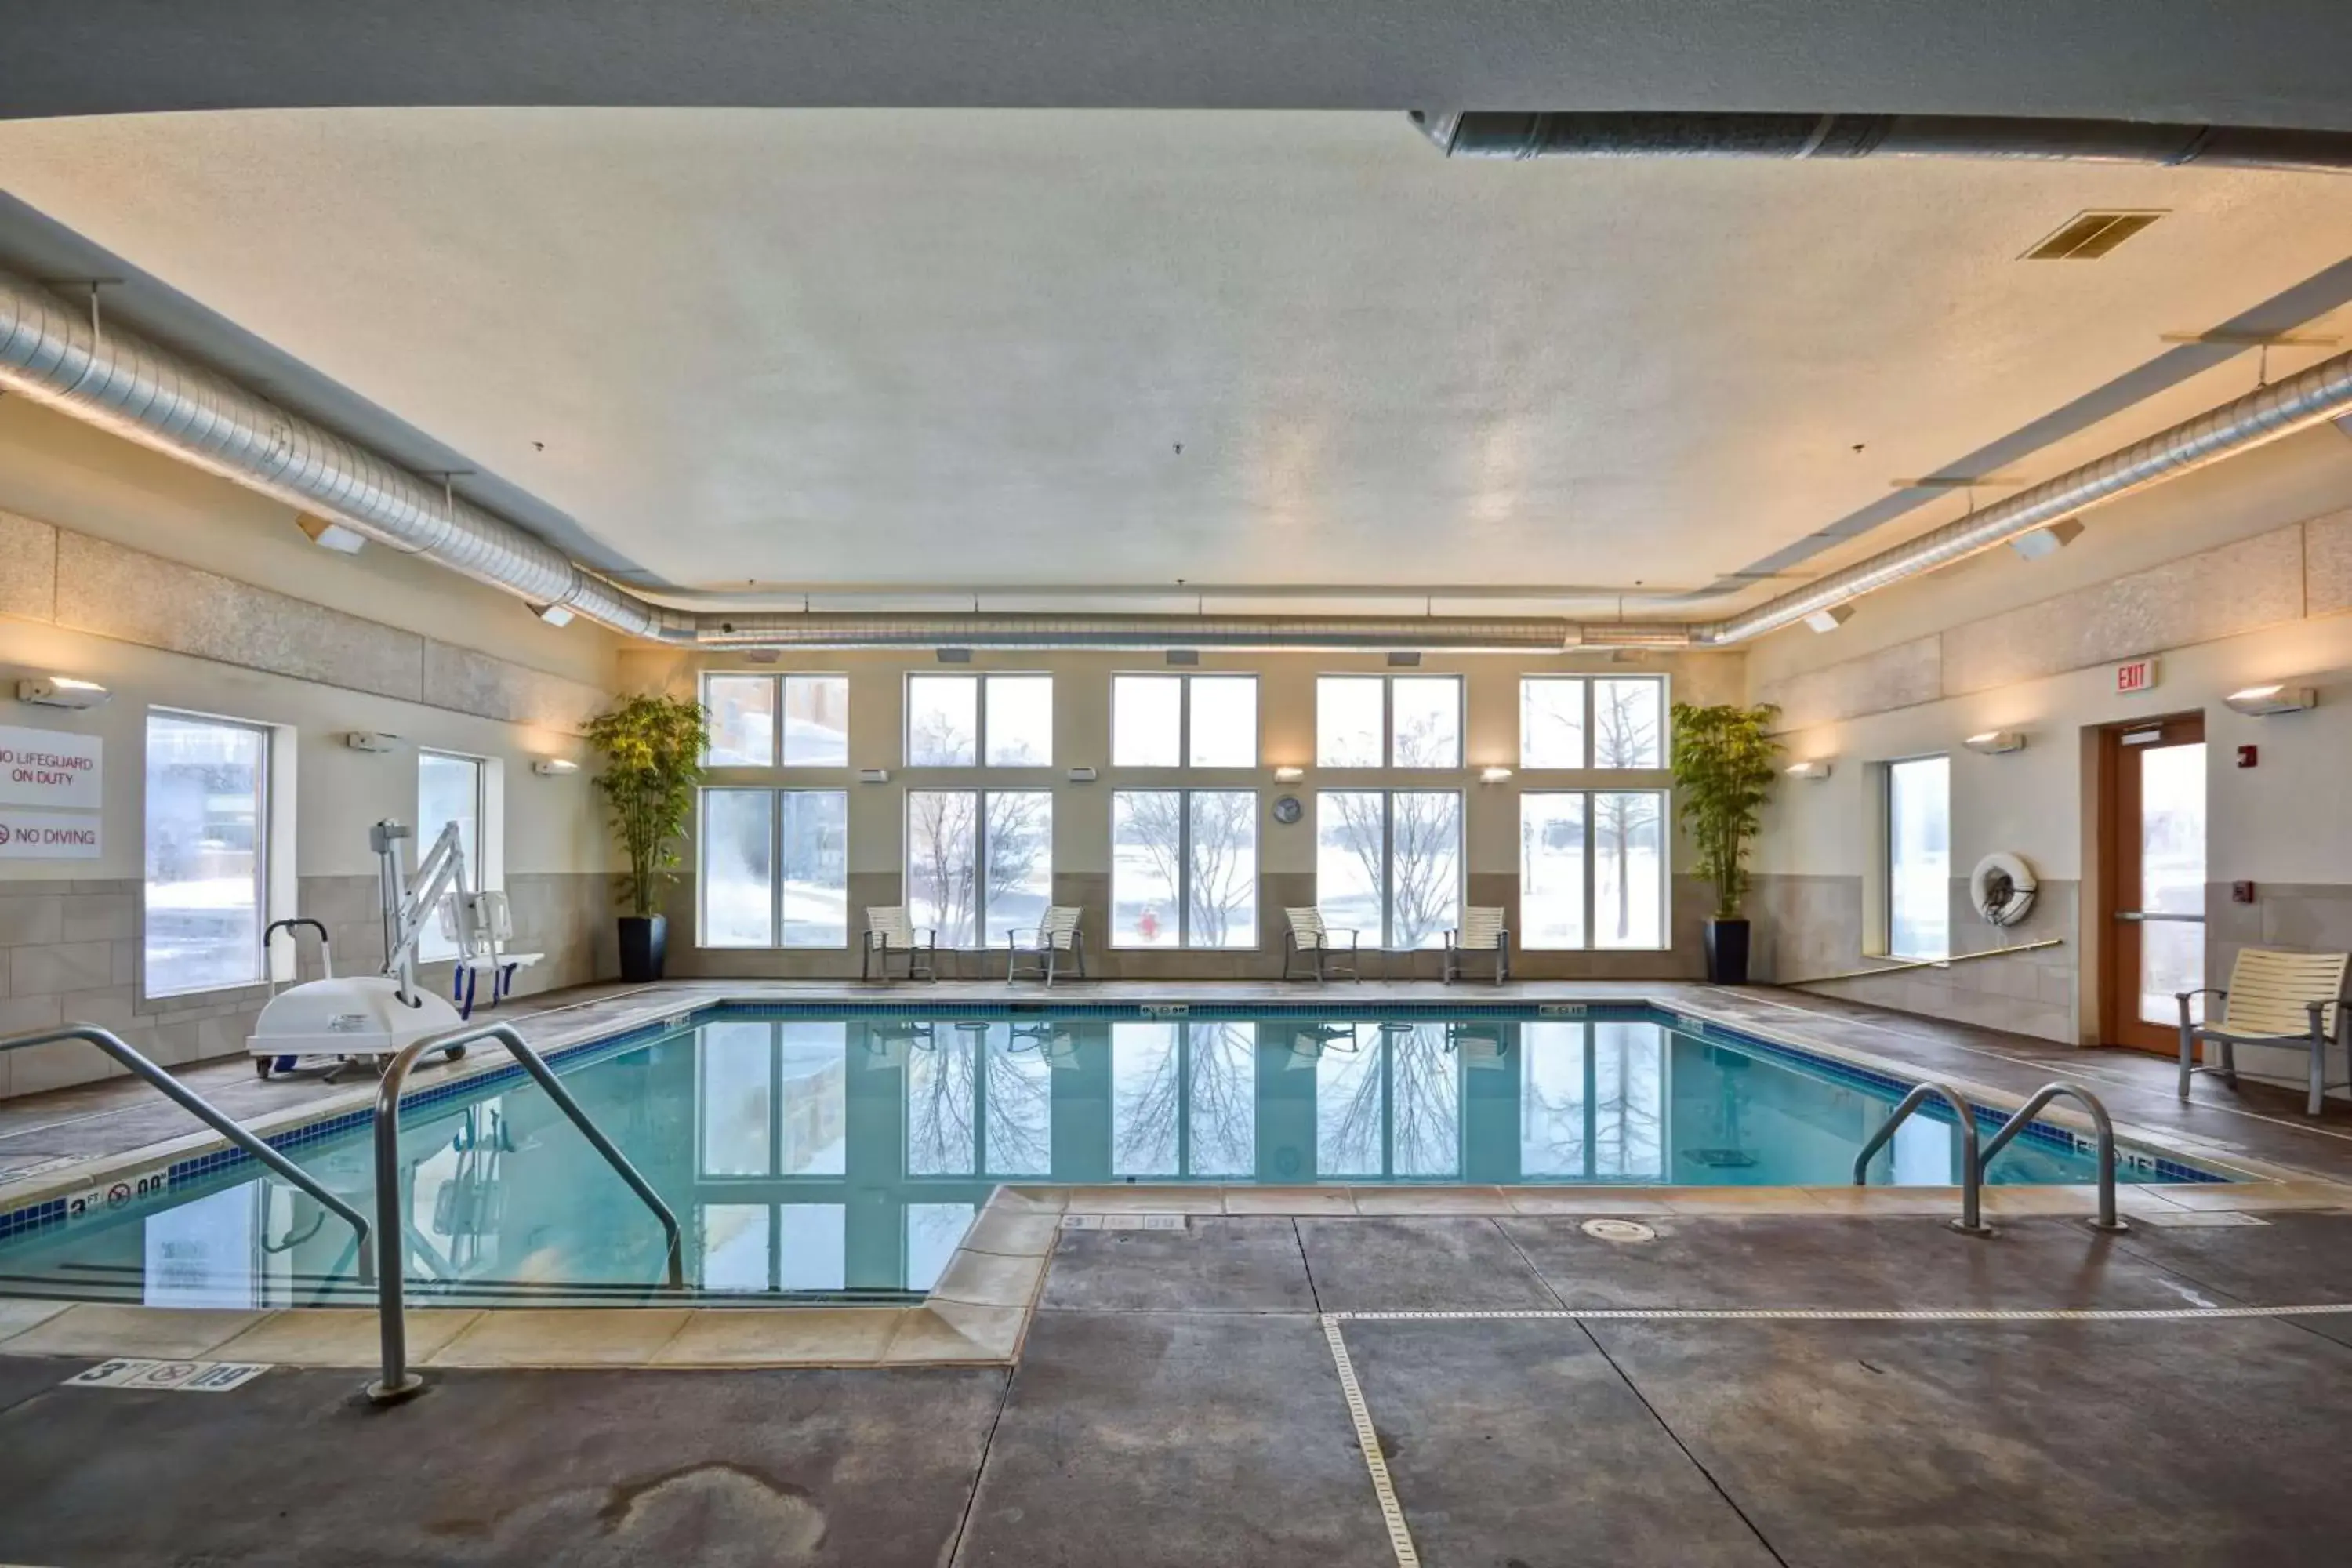 On site, Swimming Pool in Hyatt Place Chicago/Naperville/Warrenville